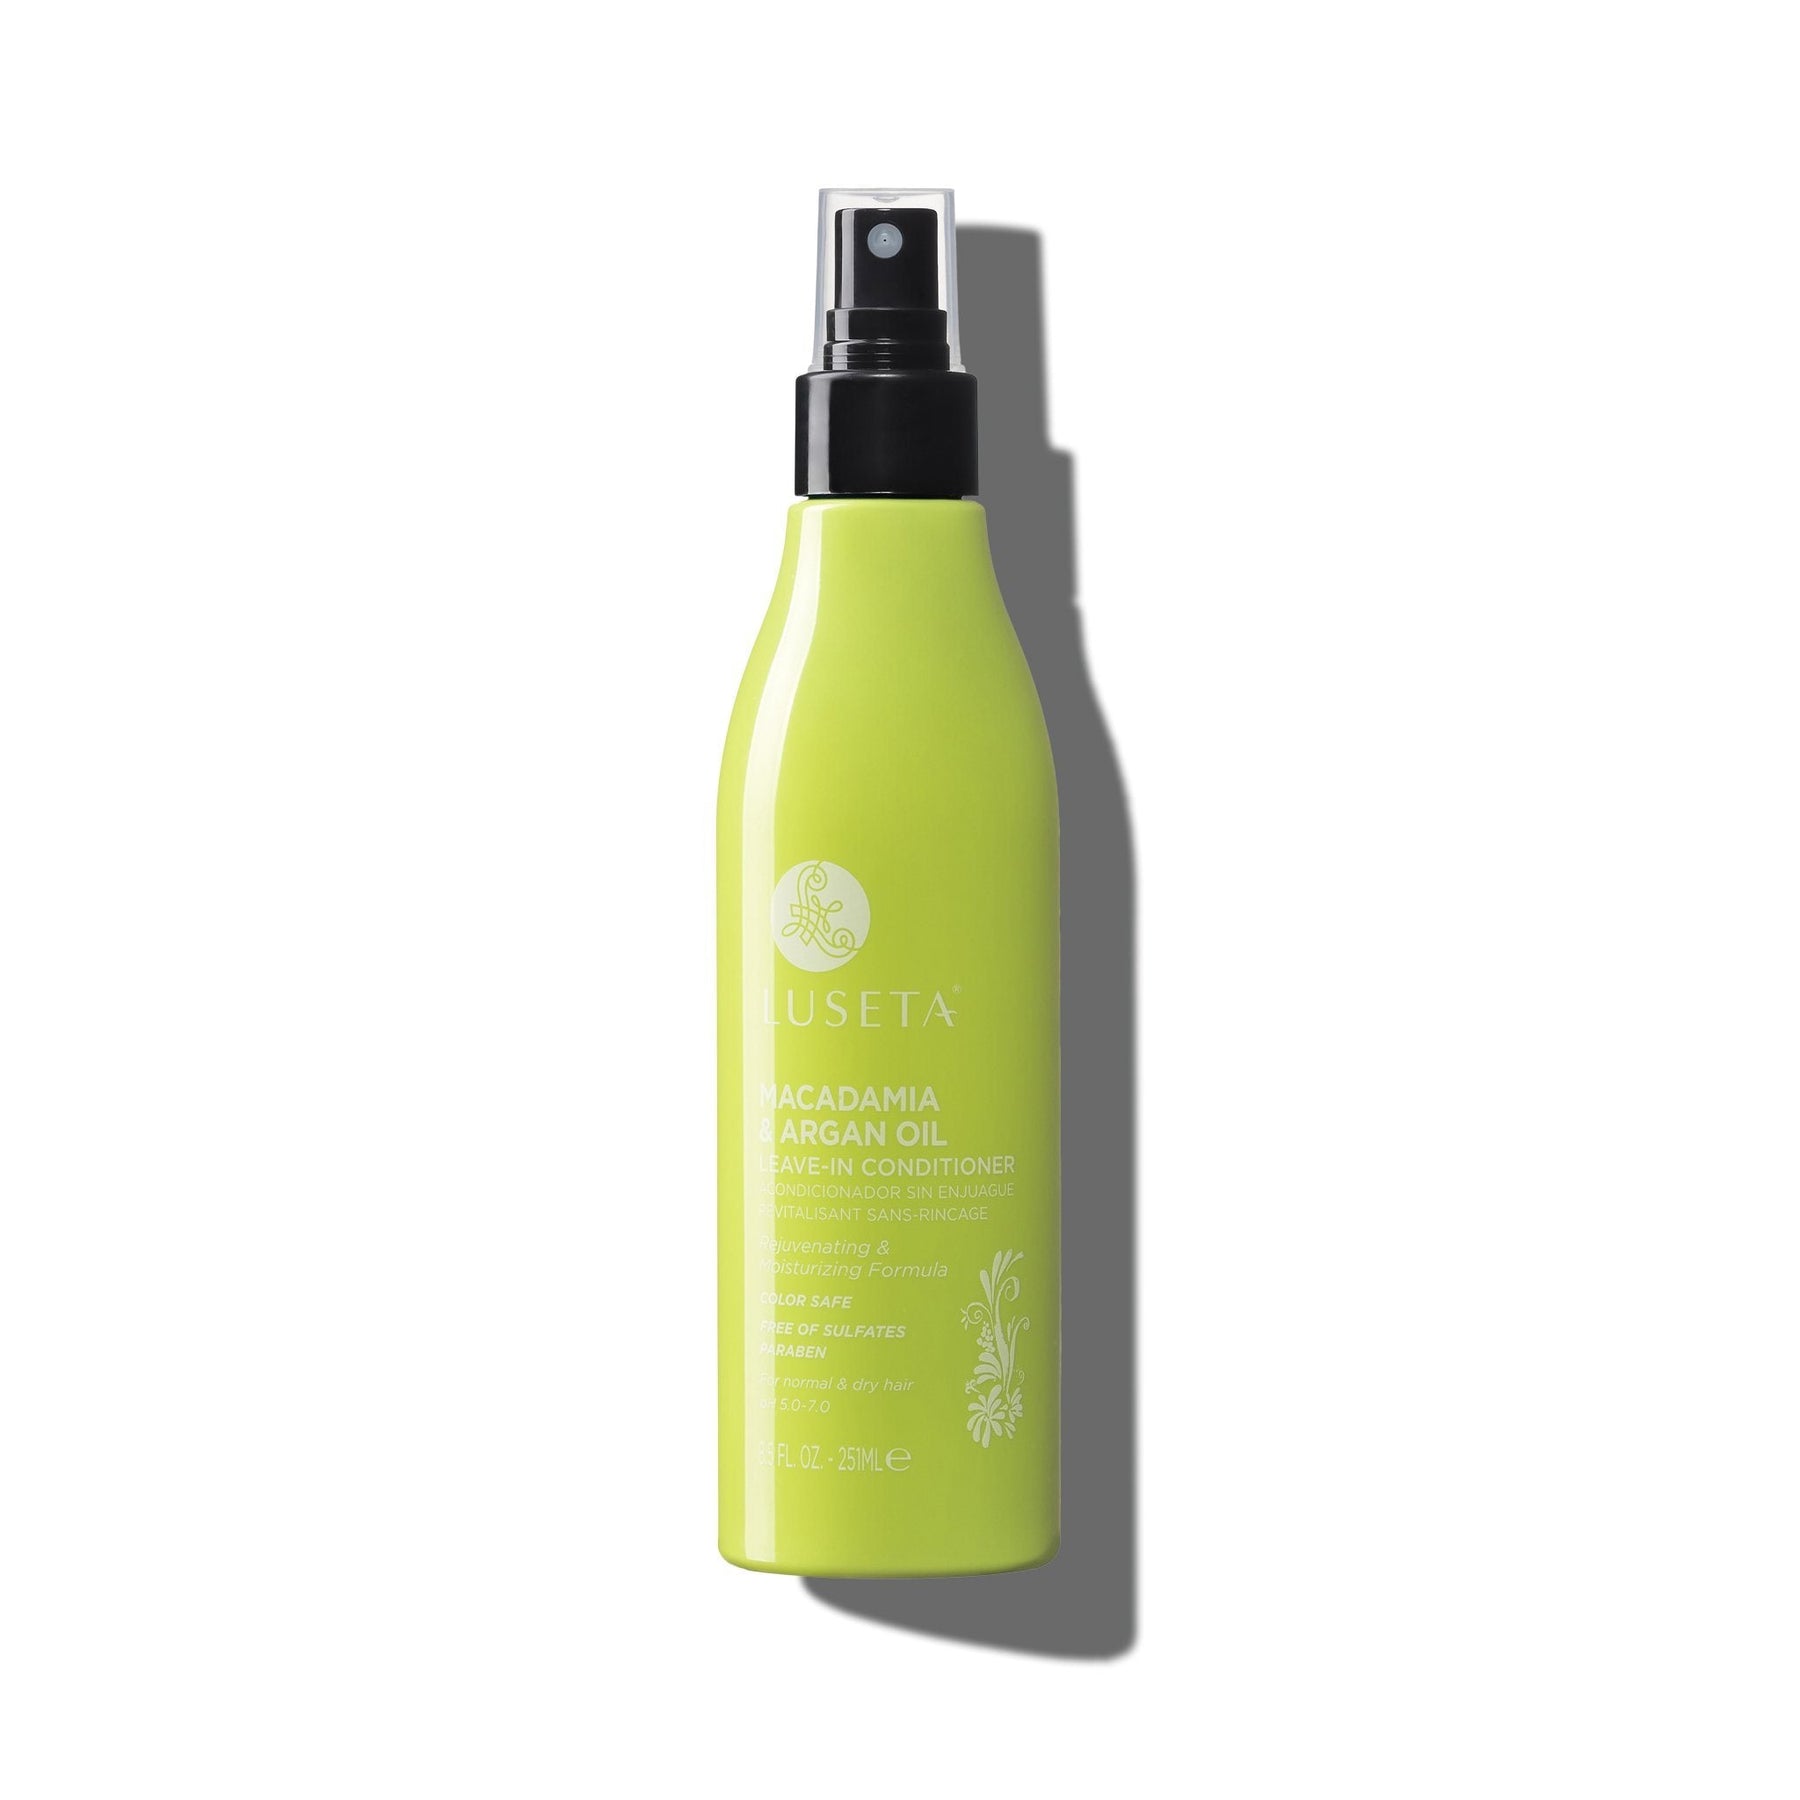 Macadamia & Argan Oil Leave-in Conditioner - ProCare Outlet by Luseta Beauty